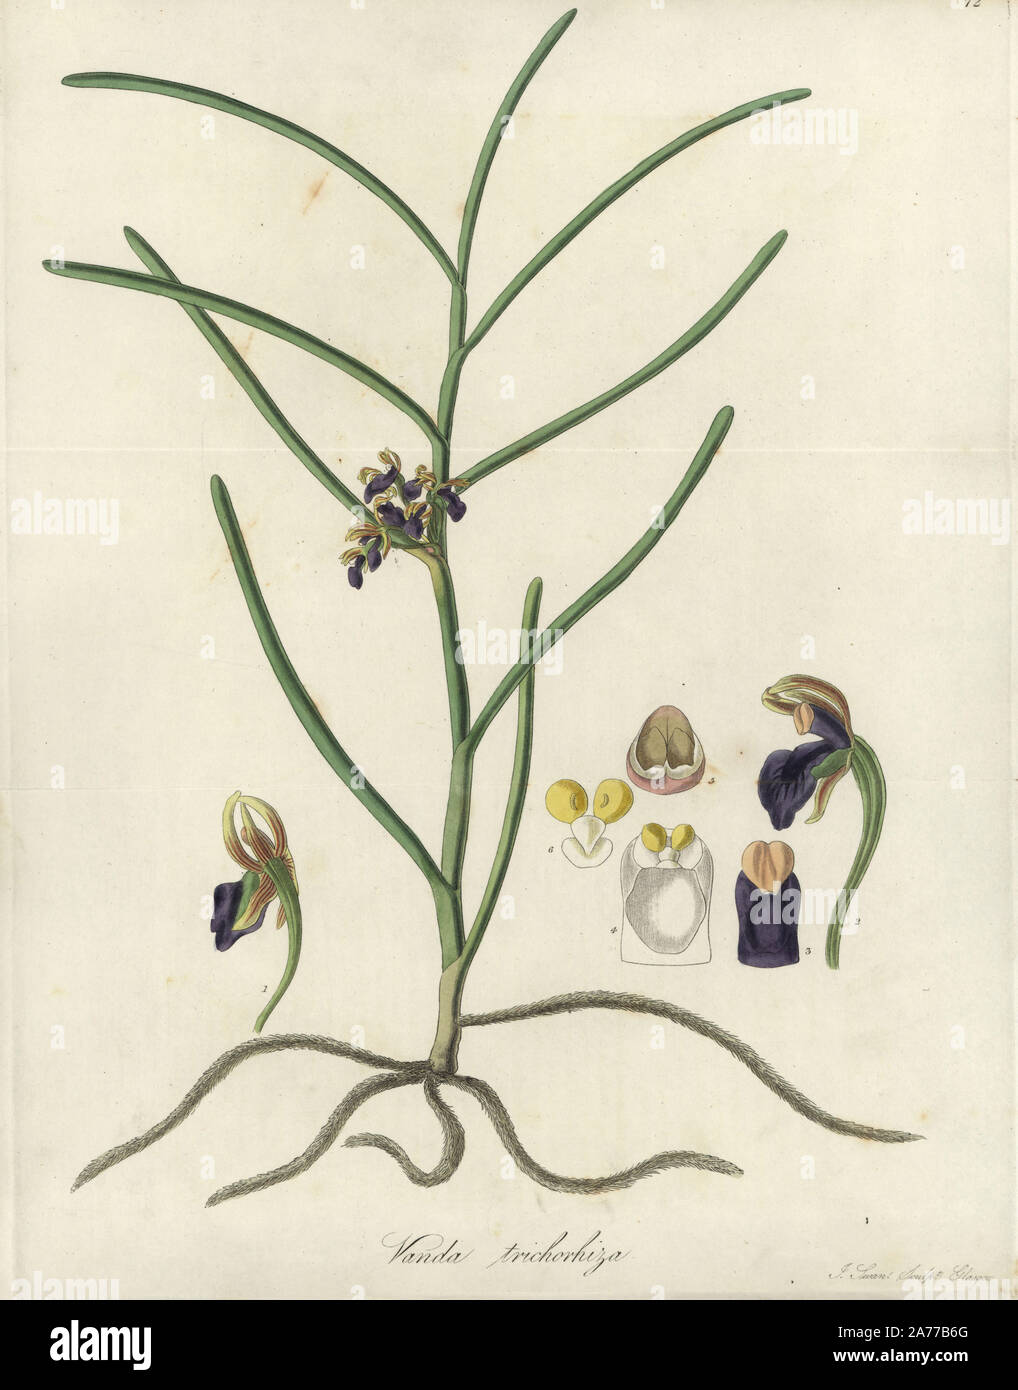 Luisia trichorrhiza orchid (Hairy rooted vanda orchid, Vanda trichorhiza). Handcoloured copperplate engraving by J. Swan after a botanical illustration by William Jackson Hooker from his own 'Exotic Flora,' Blackwood, Edinburgh, 1823. Hooker (1785-1865) was an English botanist who specialized in orchids and ferns, and was director of the Royal Botanical Gardens at Kew from 1841. Stock Photo